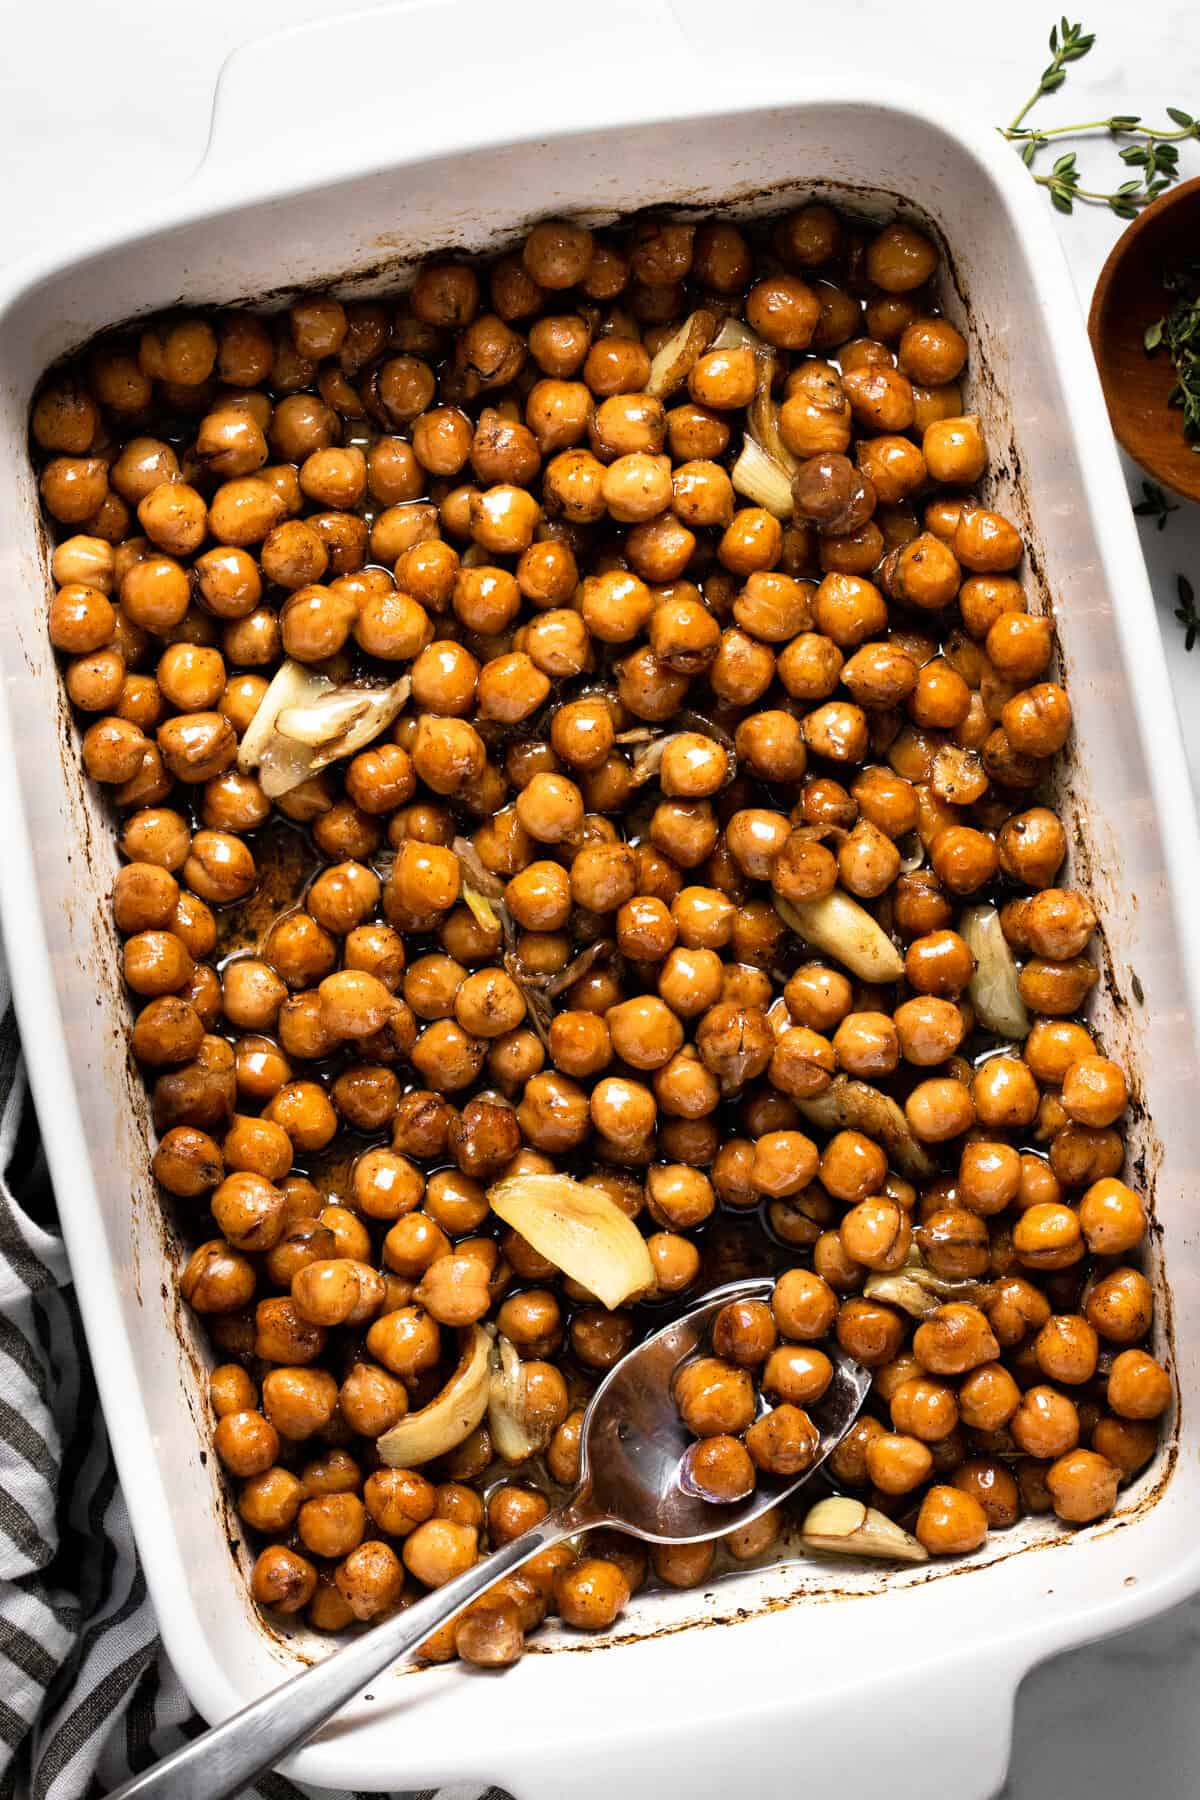 Ingredients to make braised chickpeas in a large white baking dish